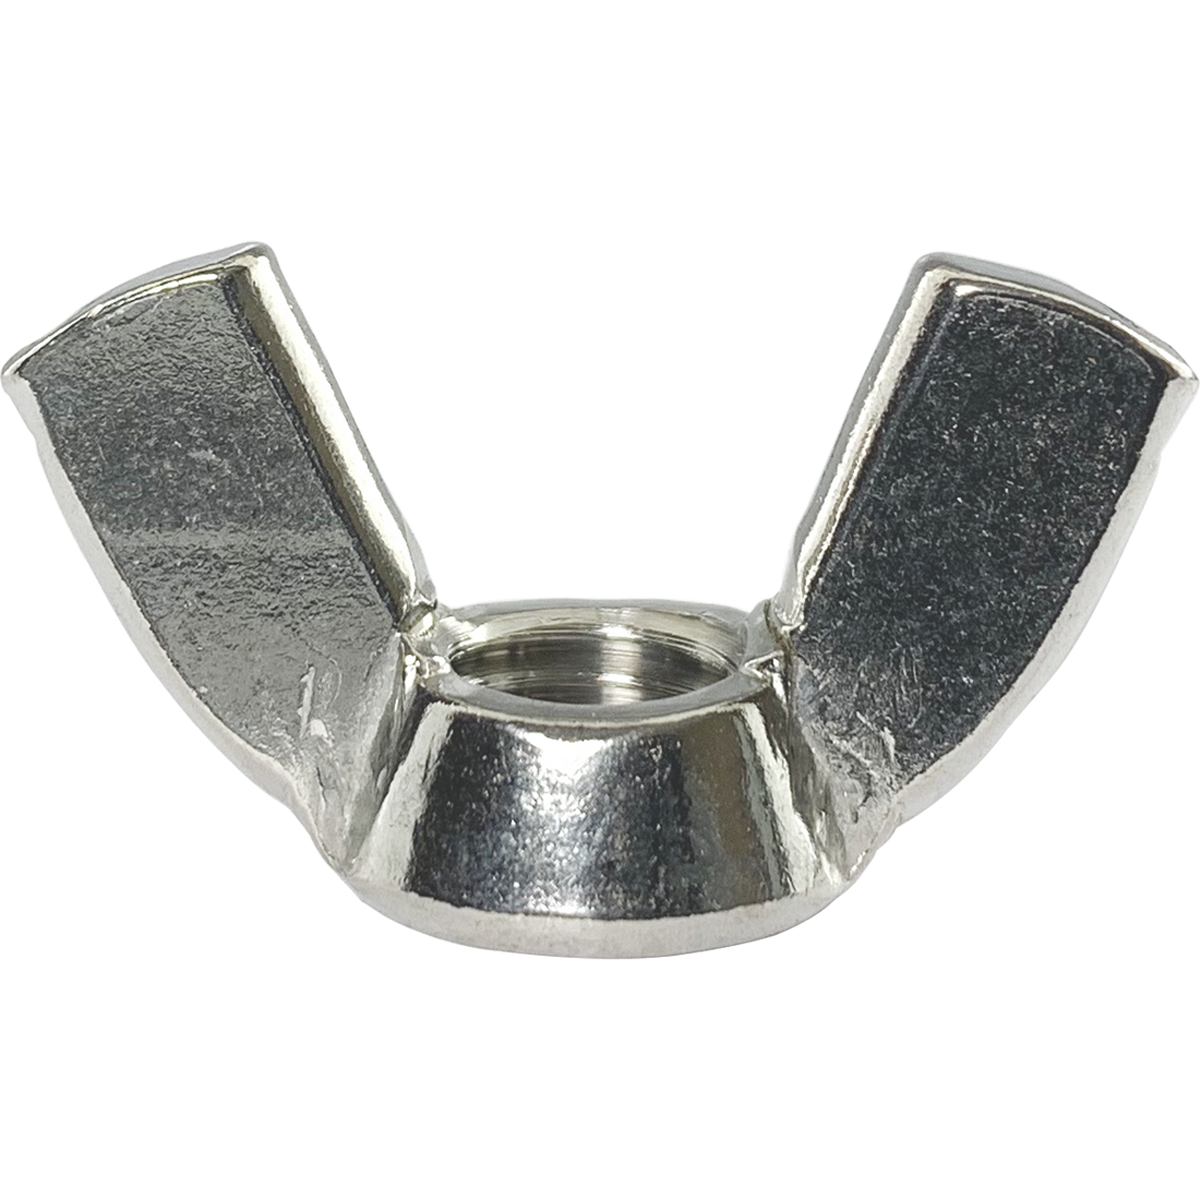 A4 stainless steel wing nuts, known as wingnuts or butterfly nuts. High corrosion resistance and ideal nut when rapid tightening and untightening by hand are needed.